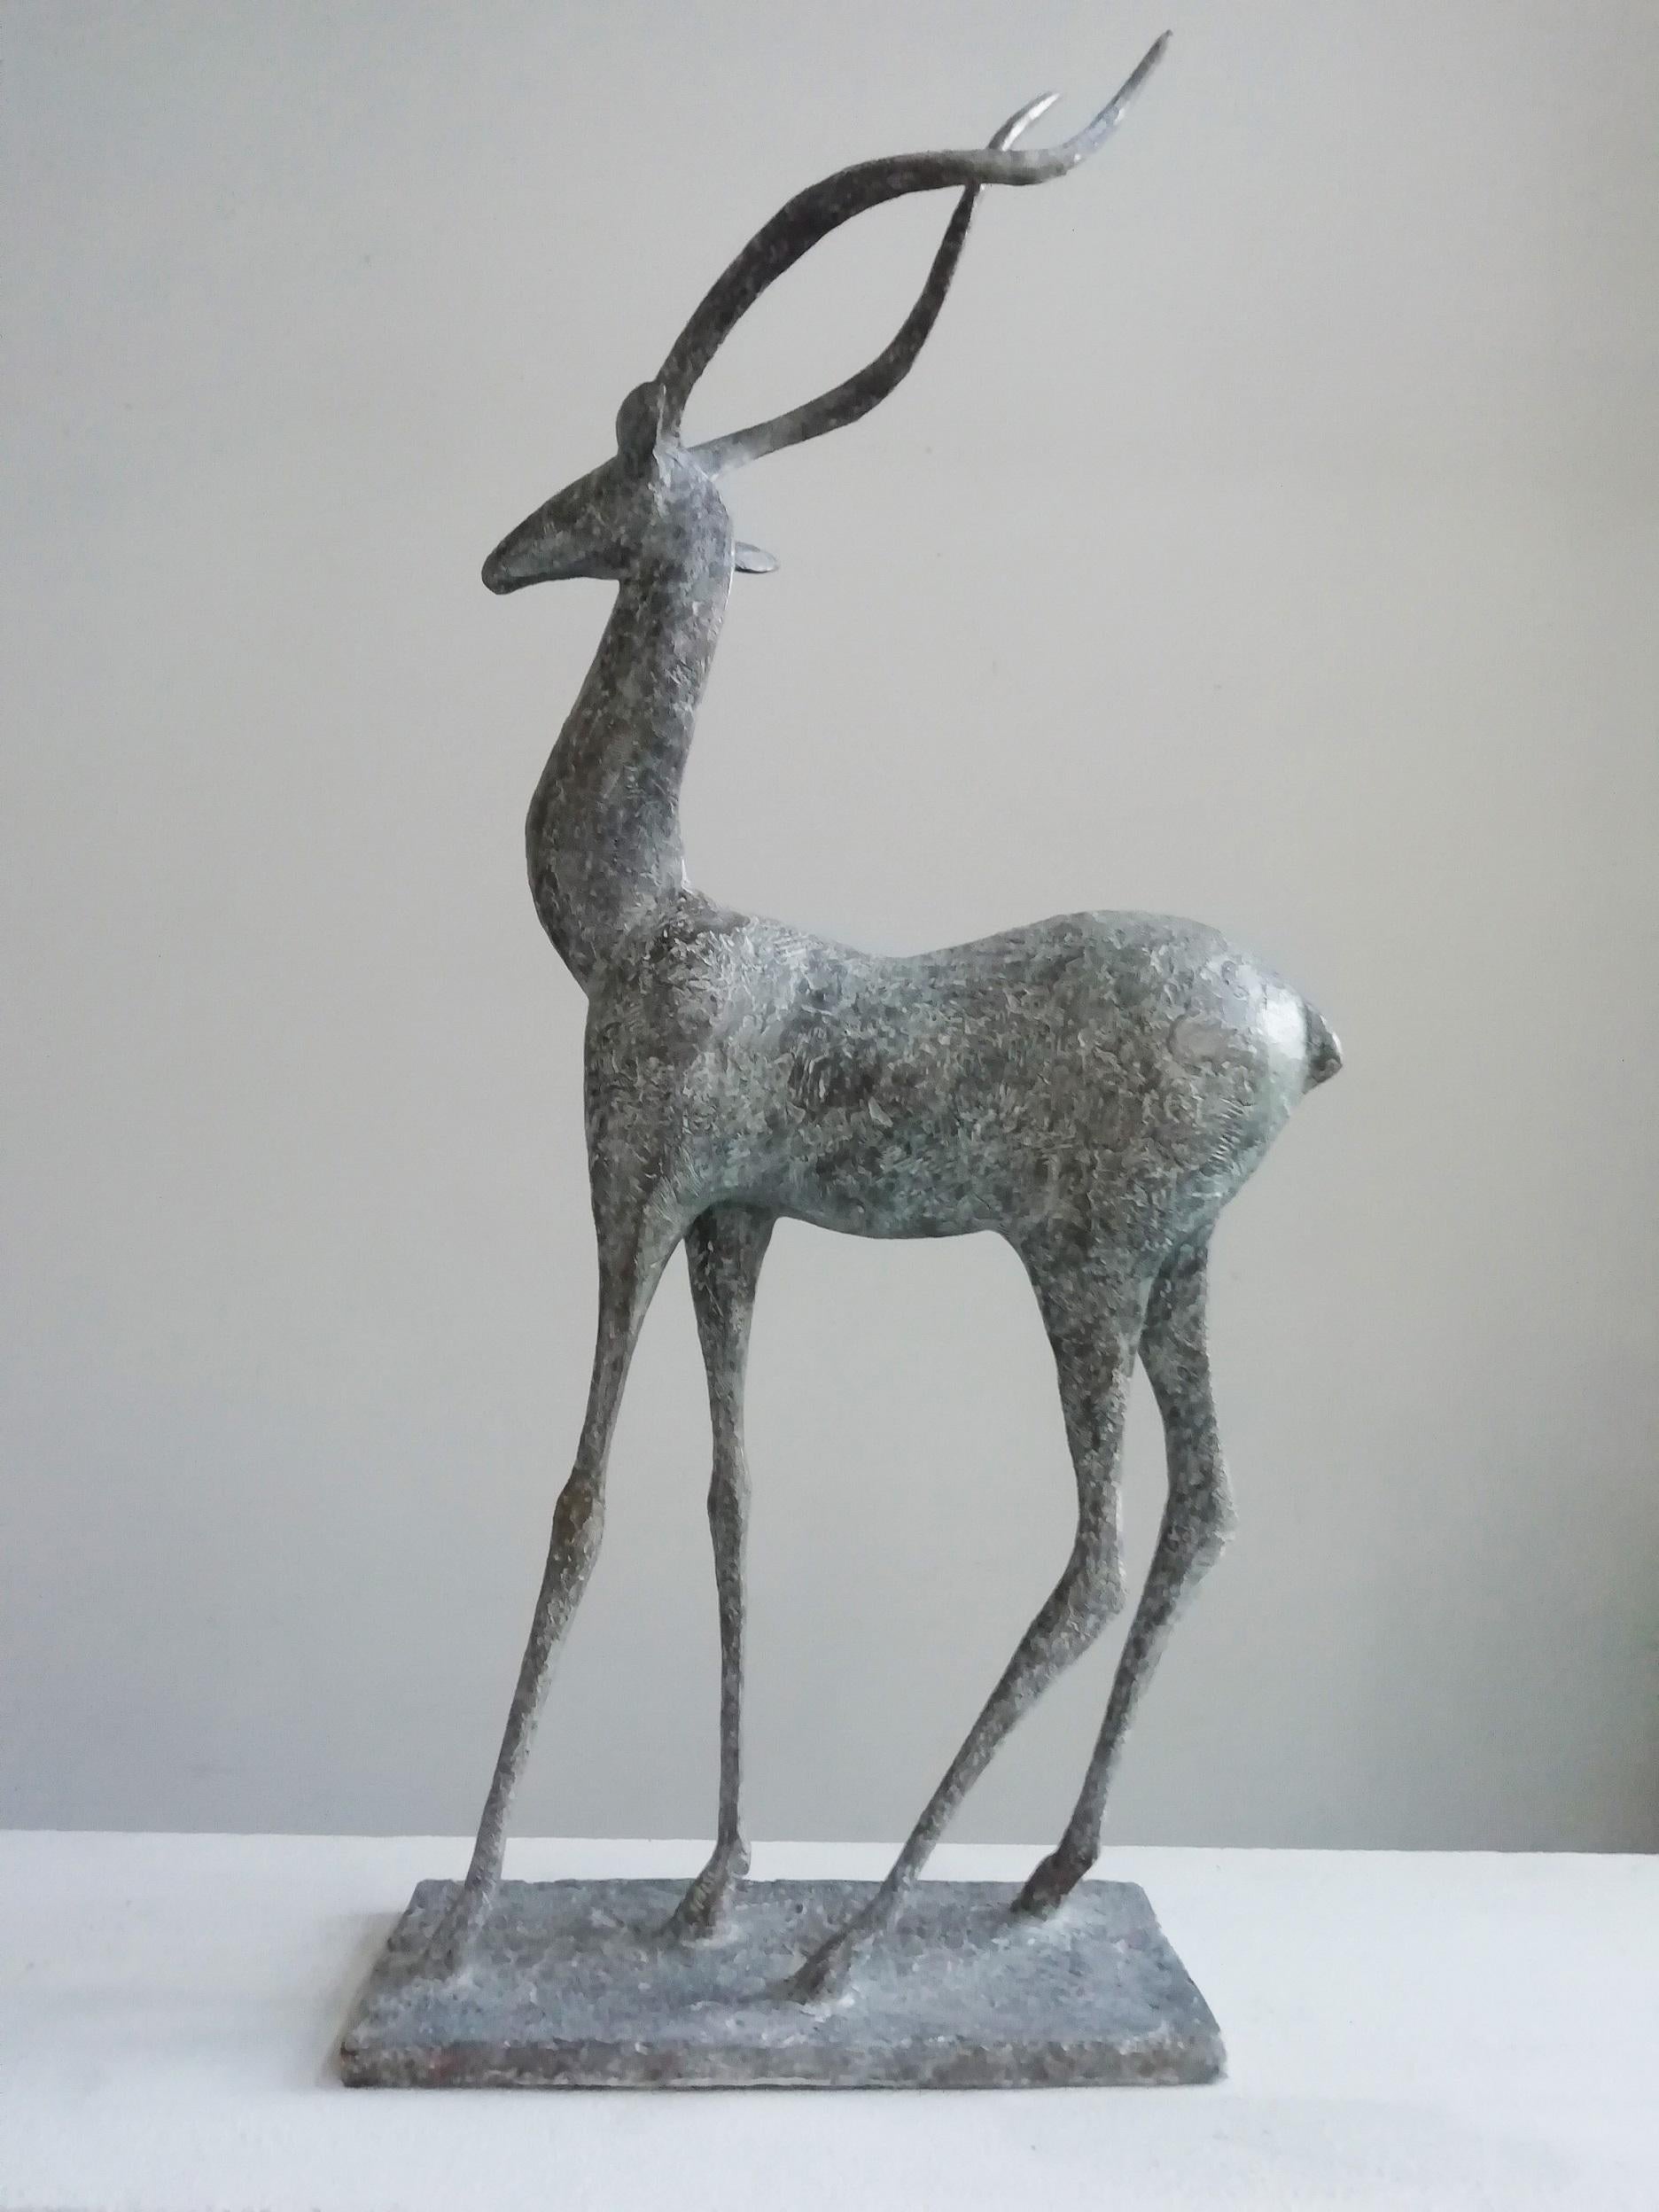 Gazelle IV is a bronze sculpture by French contemporary artist Pierre Yermia, dimensions are 69 × 35 × 12 cm (27.2 × 13.8 × 4.7 in). 
The sculpture is signed and numbered, it is part of a limited edition of 8 editions + 4 artist’s proofs, and comes